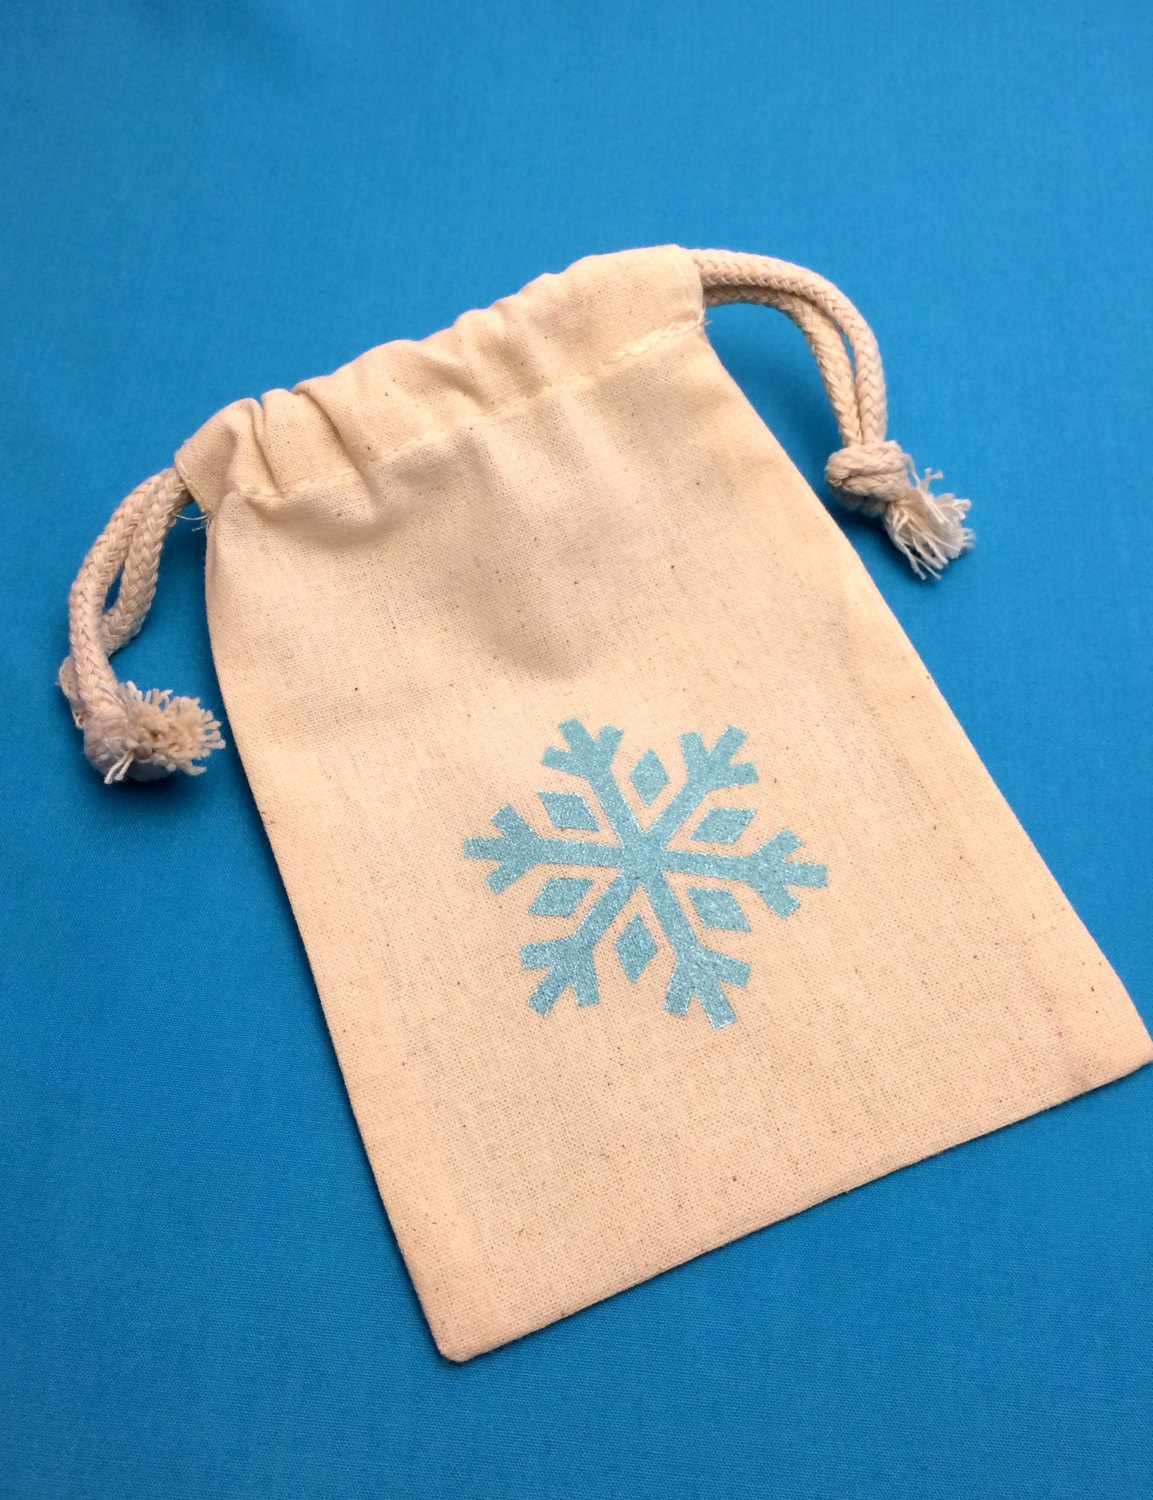 Frozen party bags from Etsy shop Mad Hatter Party Box